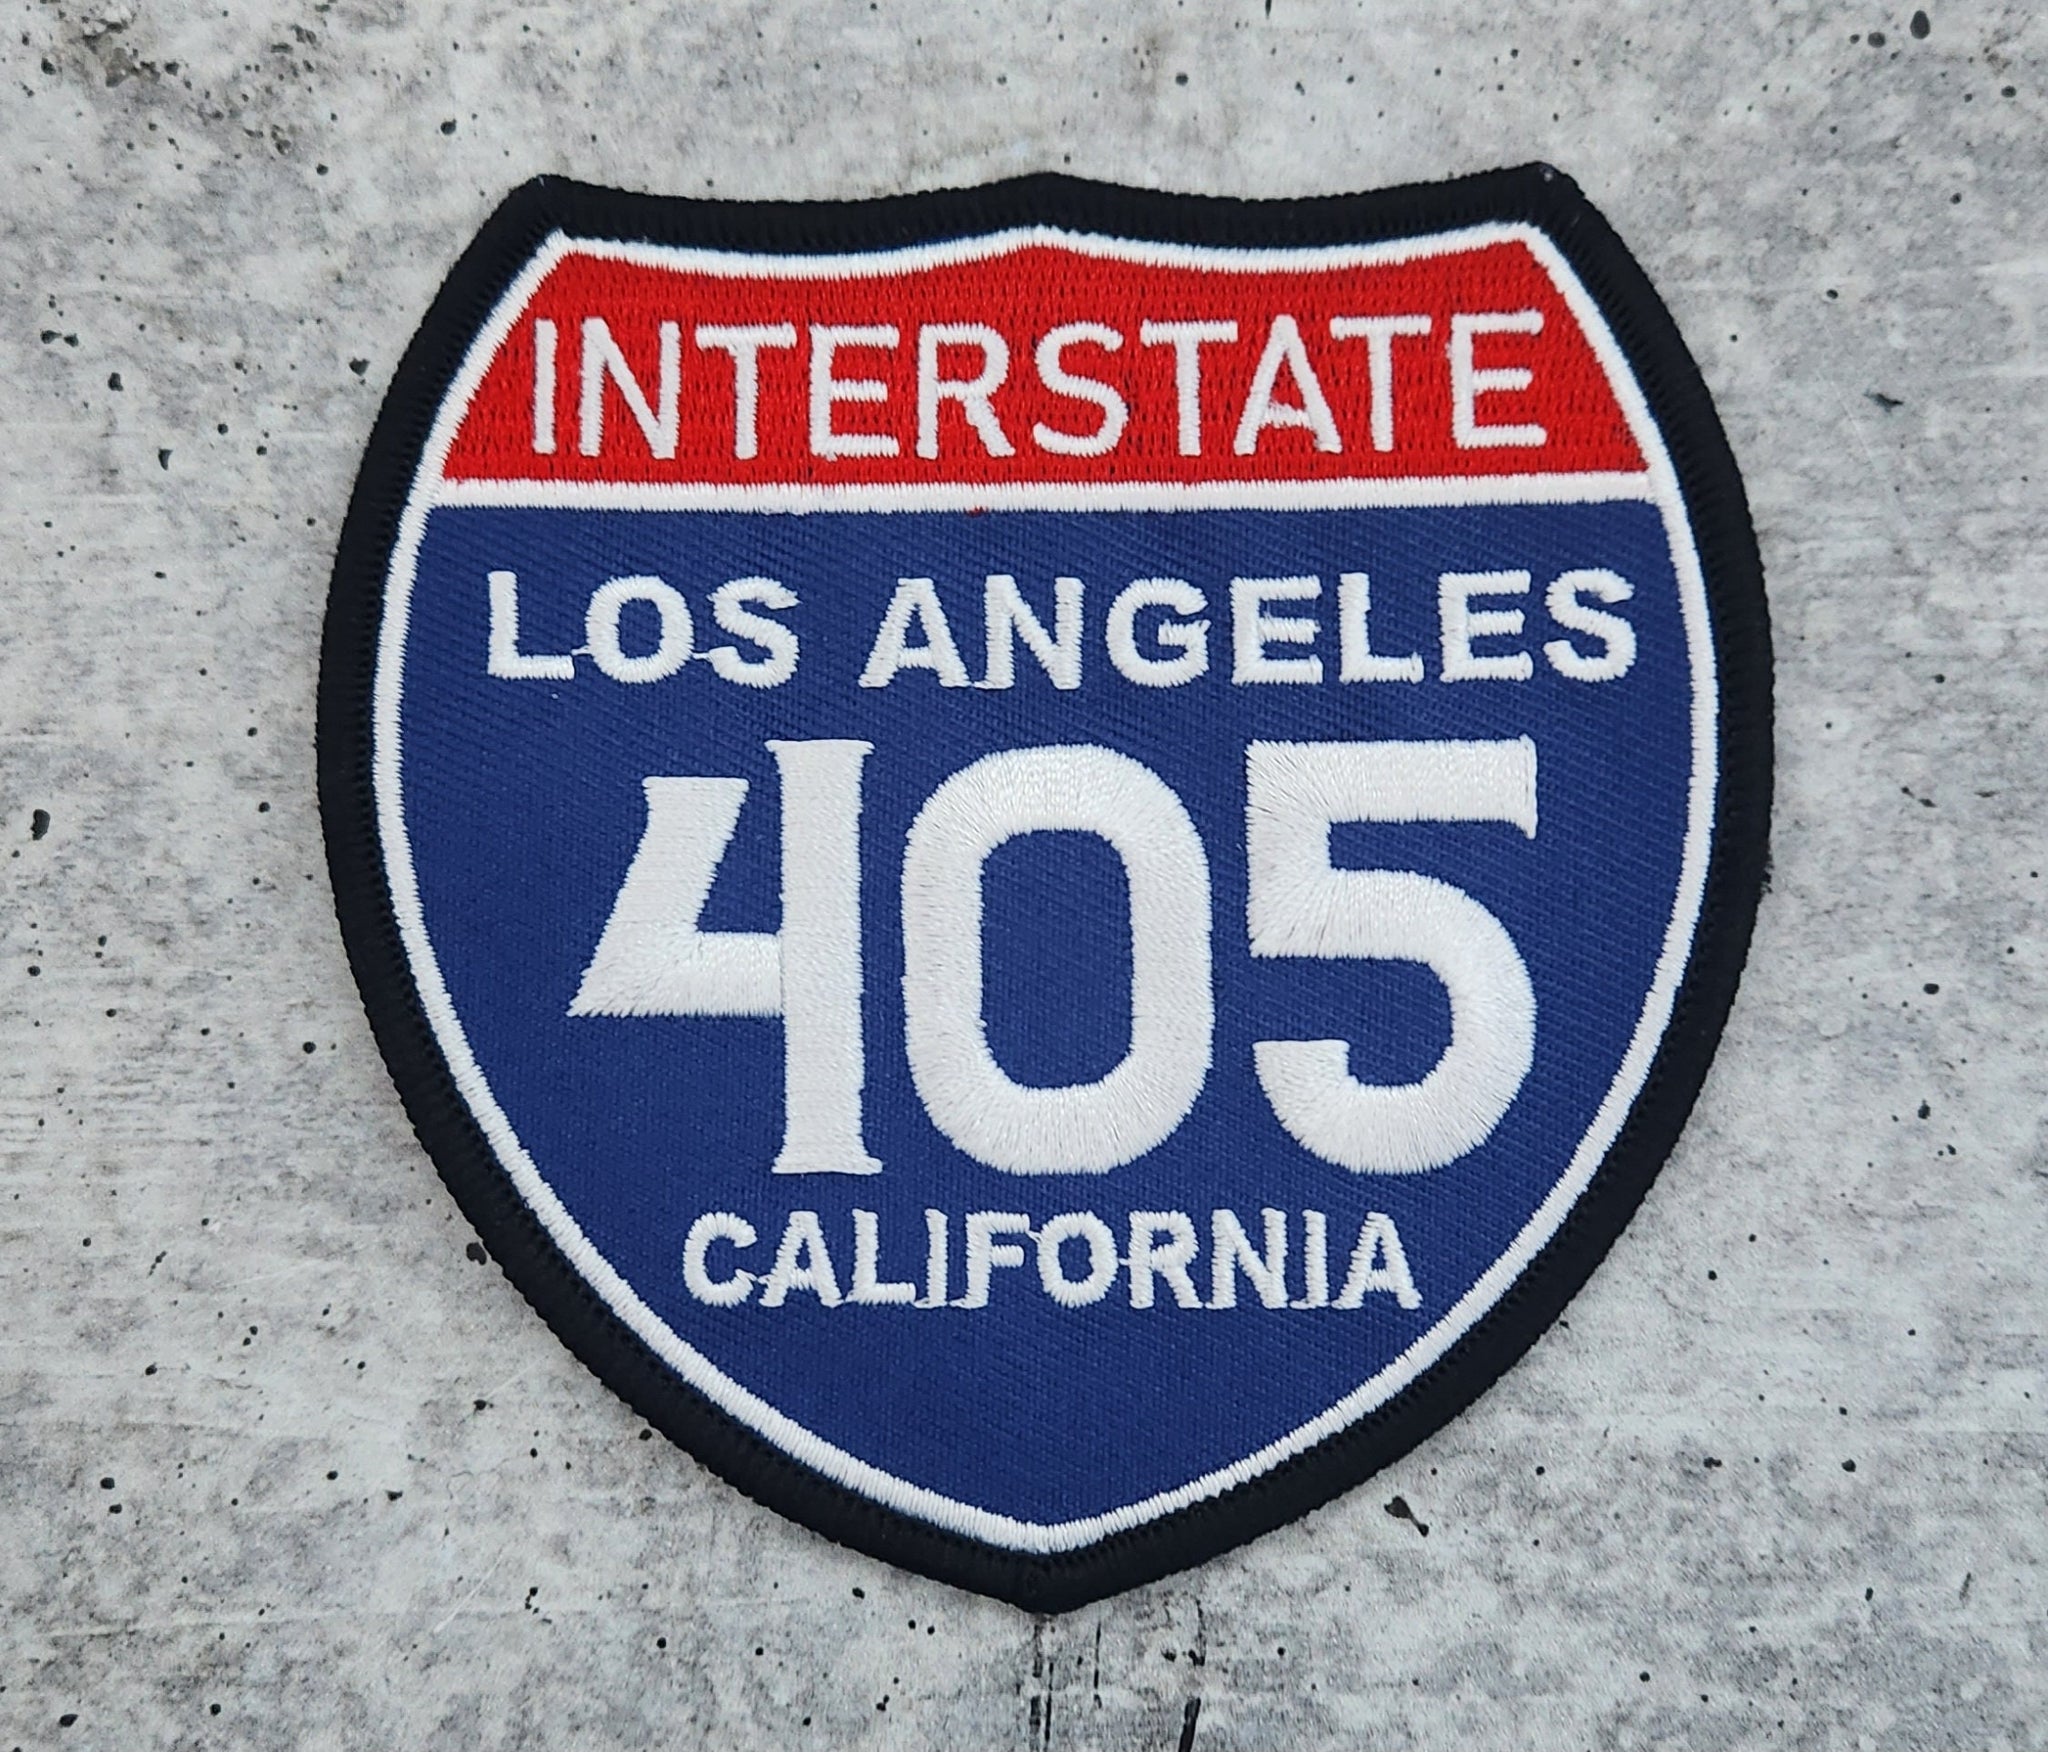 Collectable 1-pc, "LOS ANGELES, 4" Interstate 405" Iron-On Embroidered Patch; Popular California Emblem, Red/White/Blue Badge, Patch for Jac